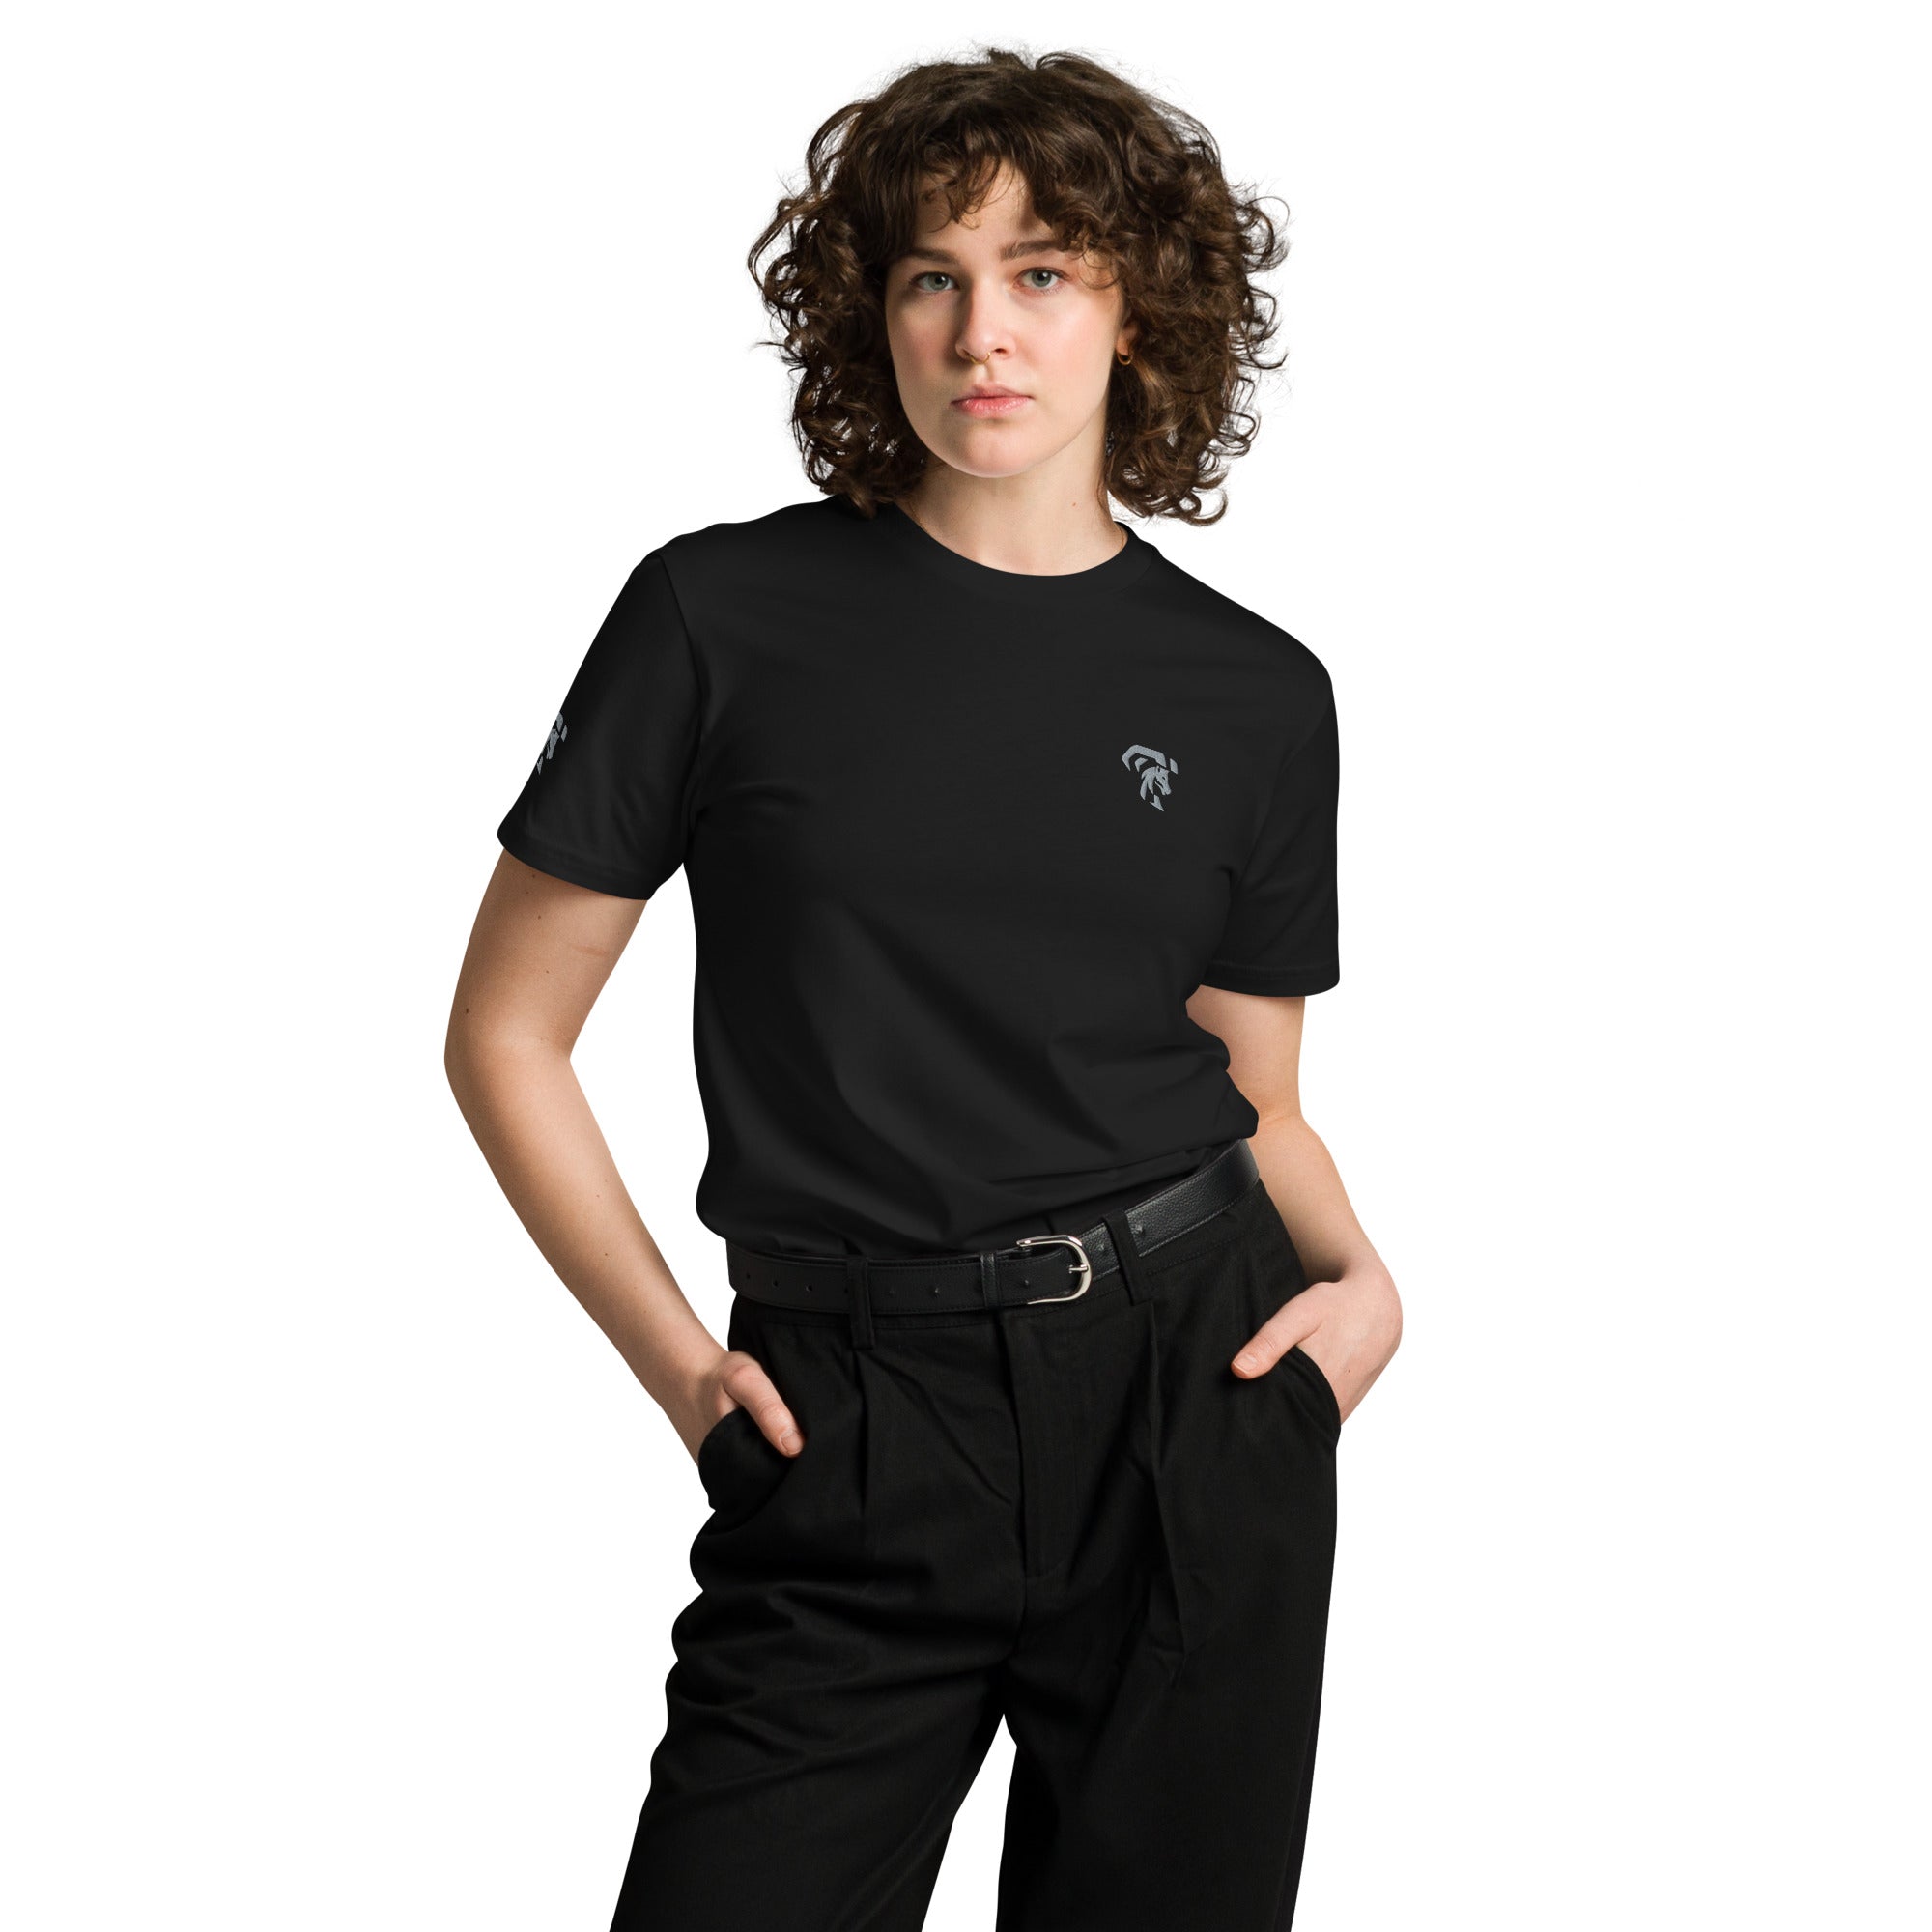 Elevate Your Wardrobe with the Filly Style Unisex Premium T-Shirt